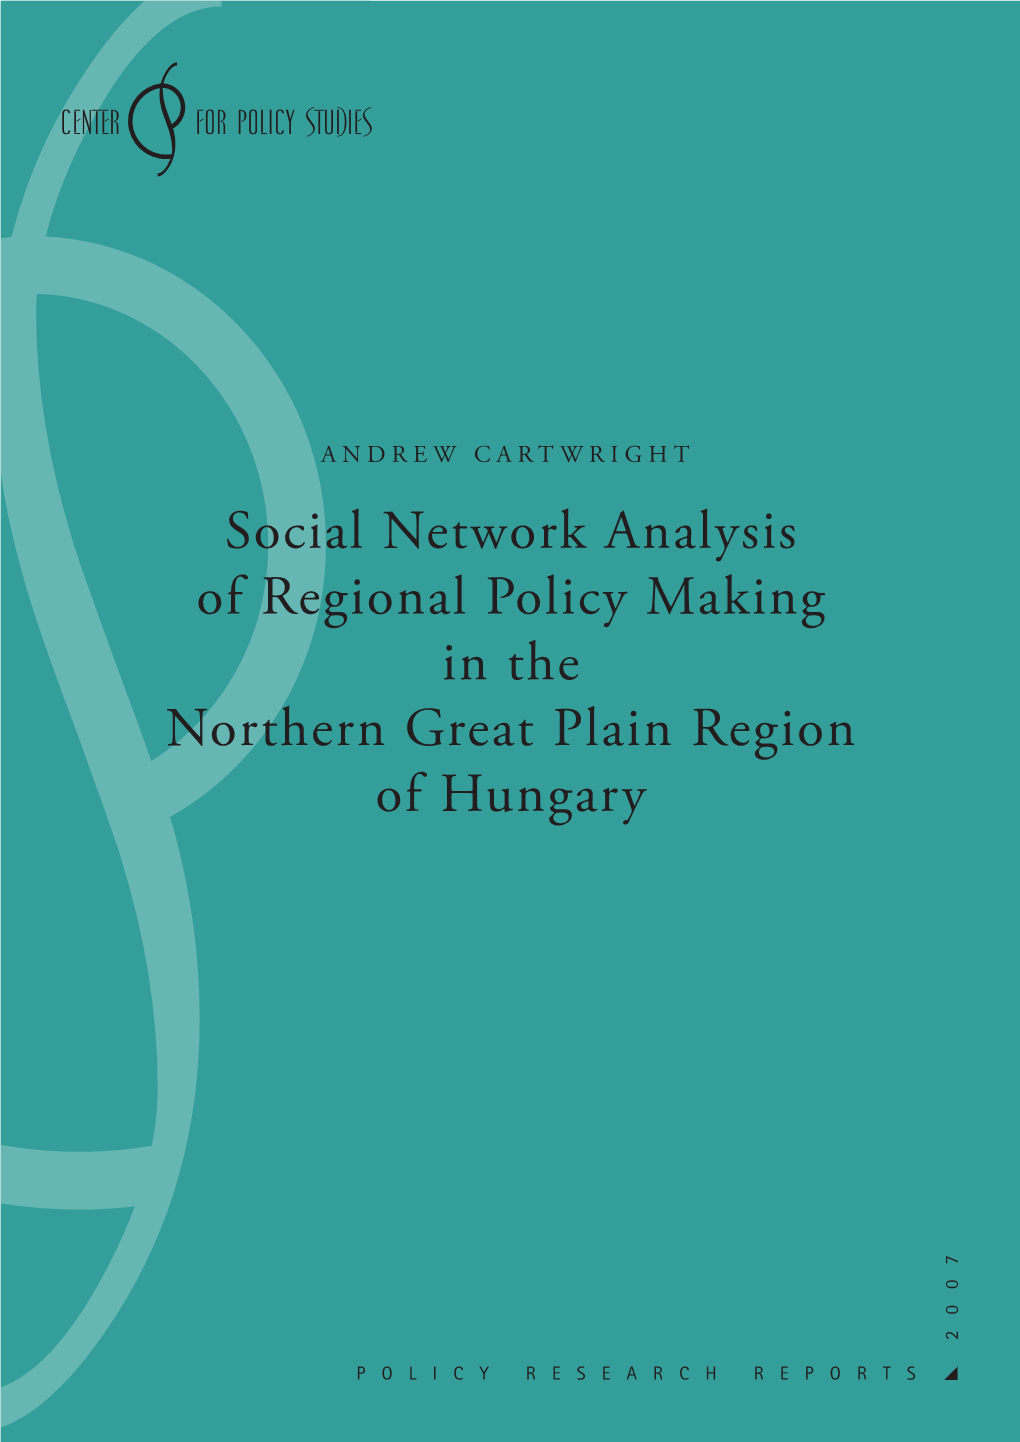 Social Network Analysis of Regional Policy Making in the Northern Great Plain Region of Hungary 2007